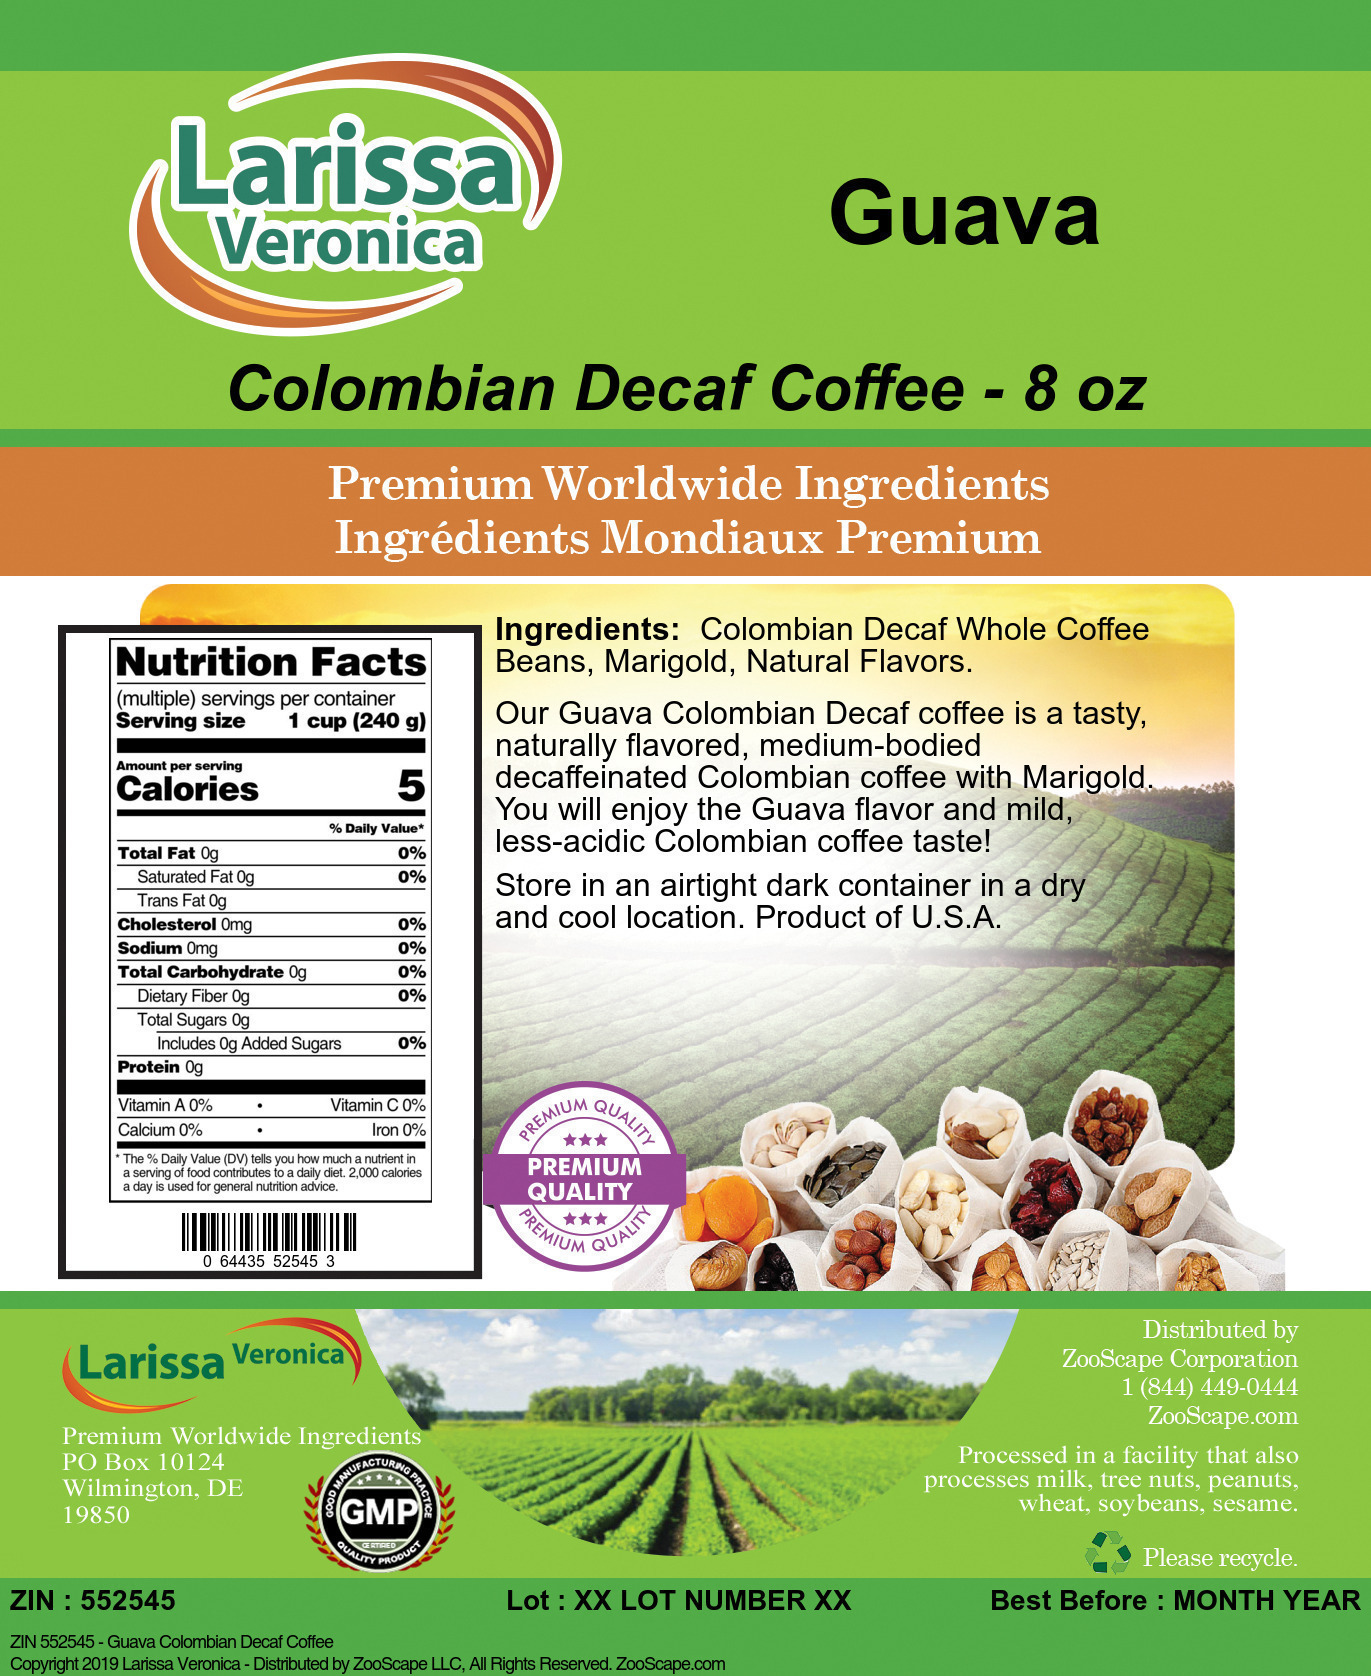 Guava Colombian Decaf Coffee - Label